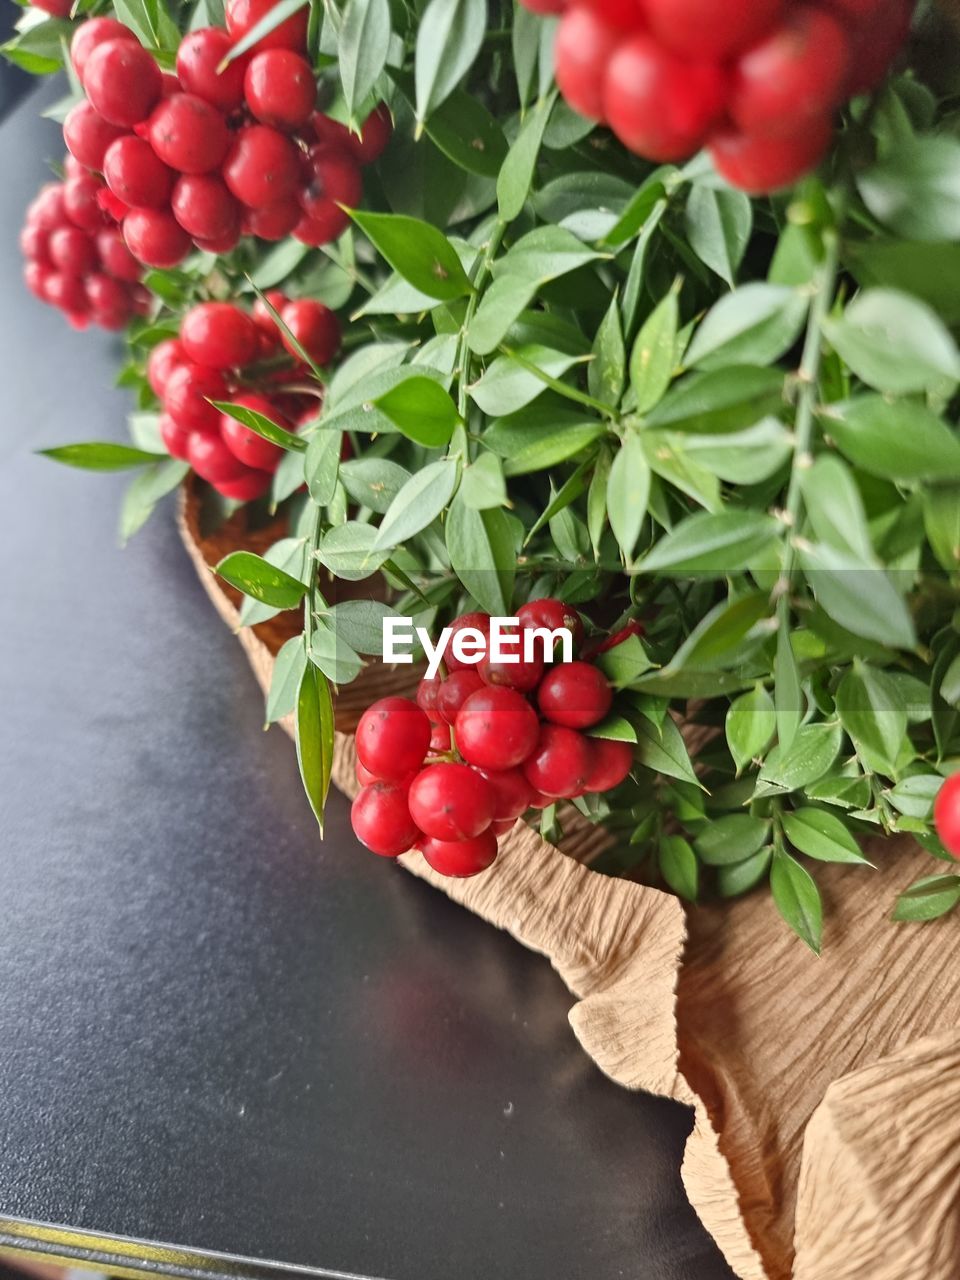 food and drink, food, healthy eating, fruit, plant, freshness, wellbeing, red, produce, leaf, plant part, vegetable, flower, no people, tomato, nature, indoors, green, organic, close-up, berry, juicy, high angle view